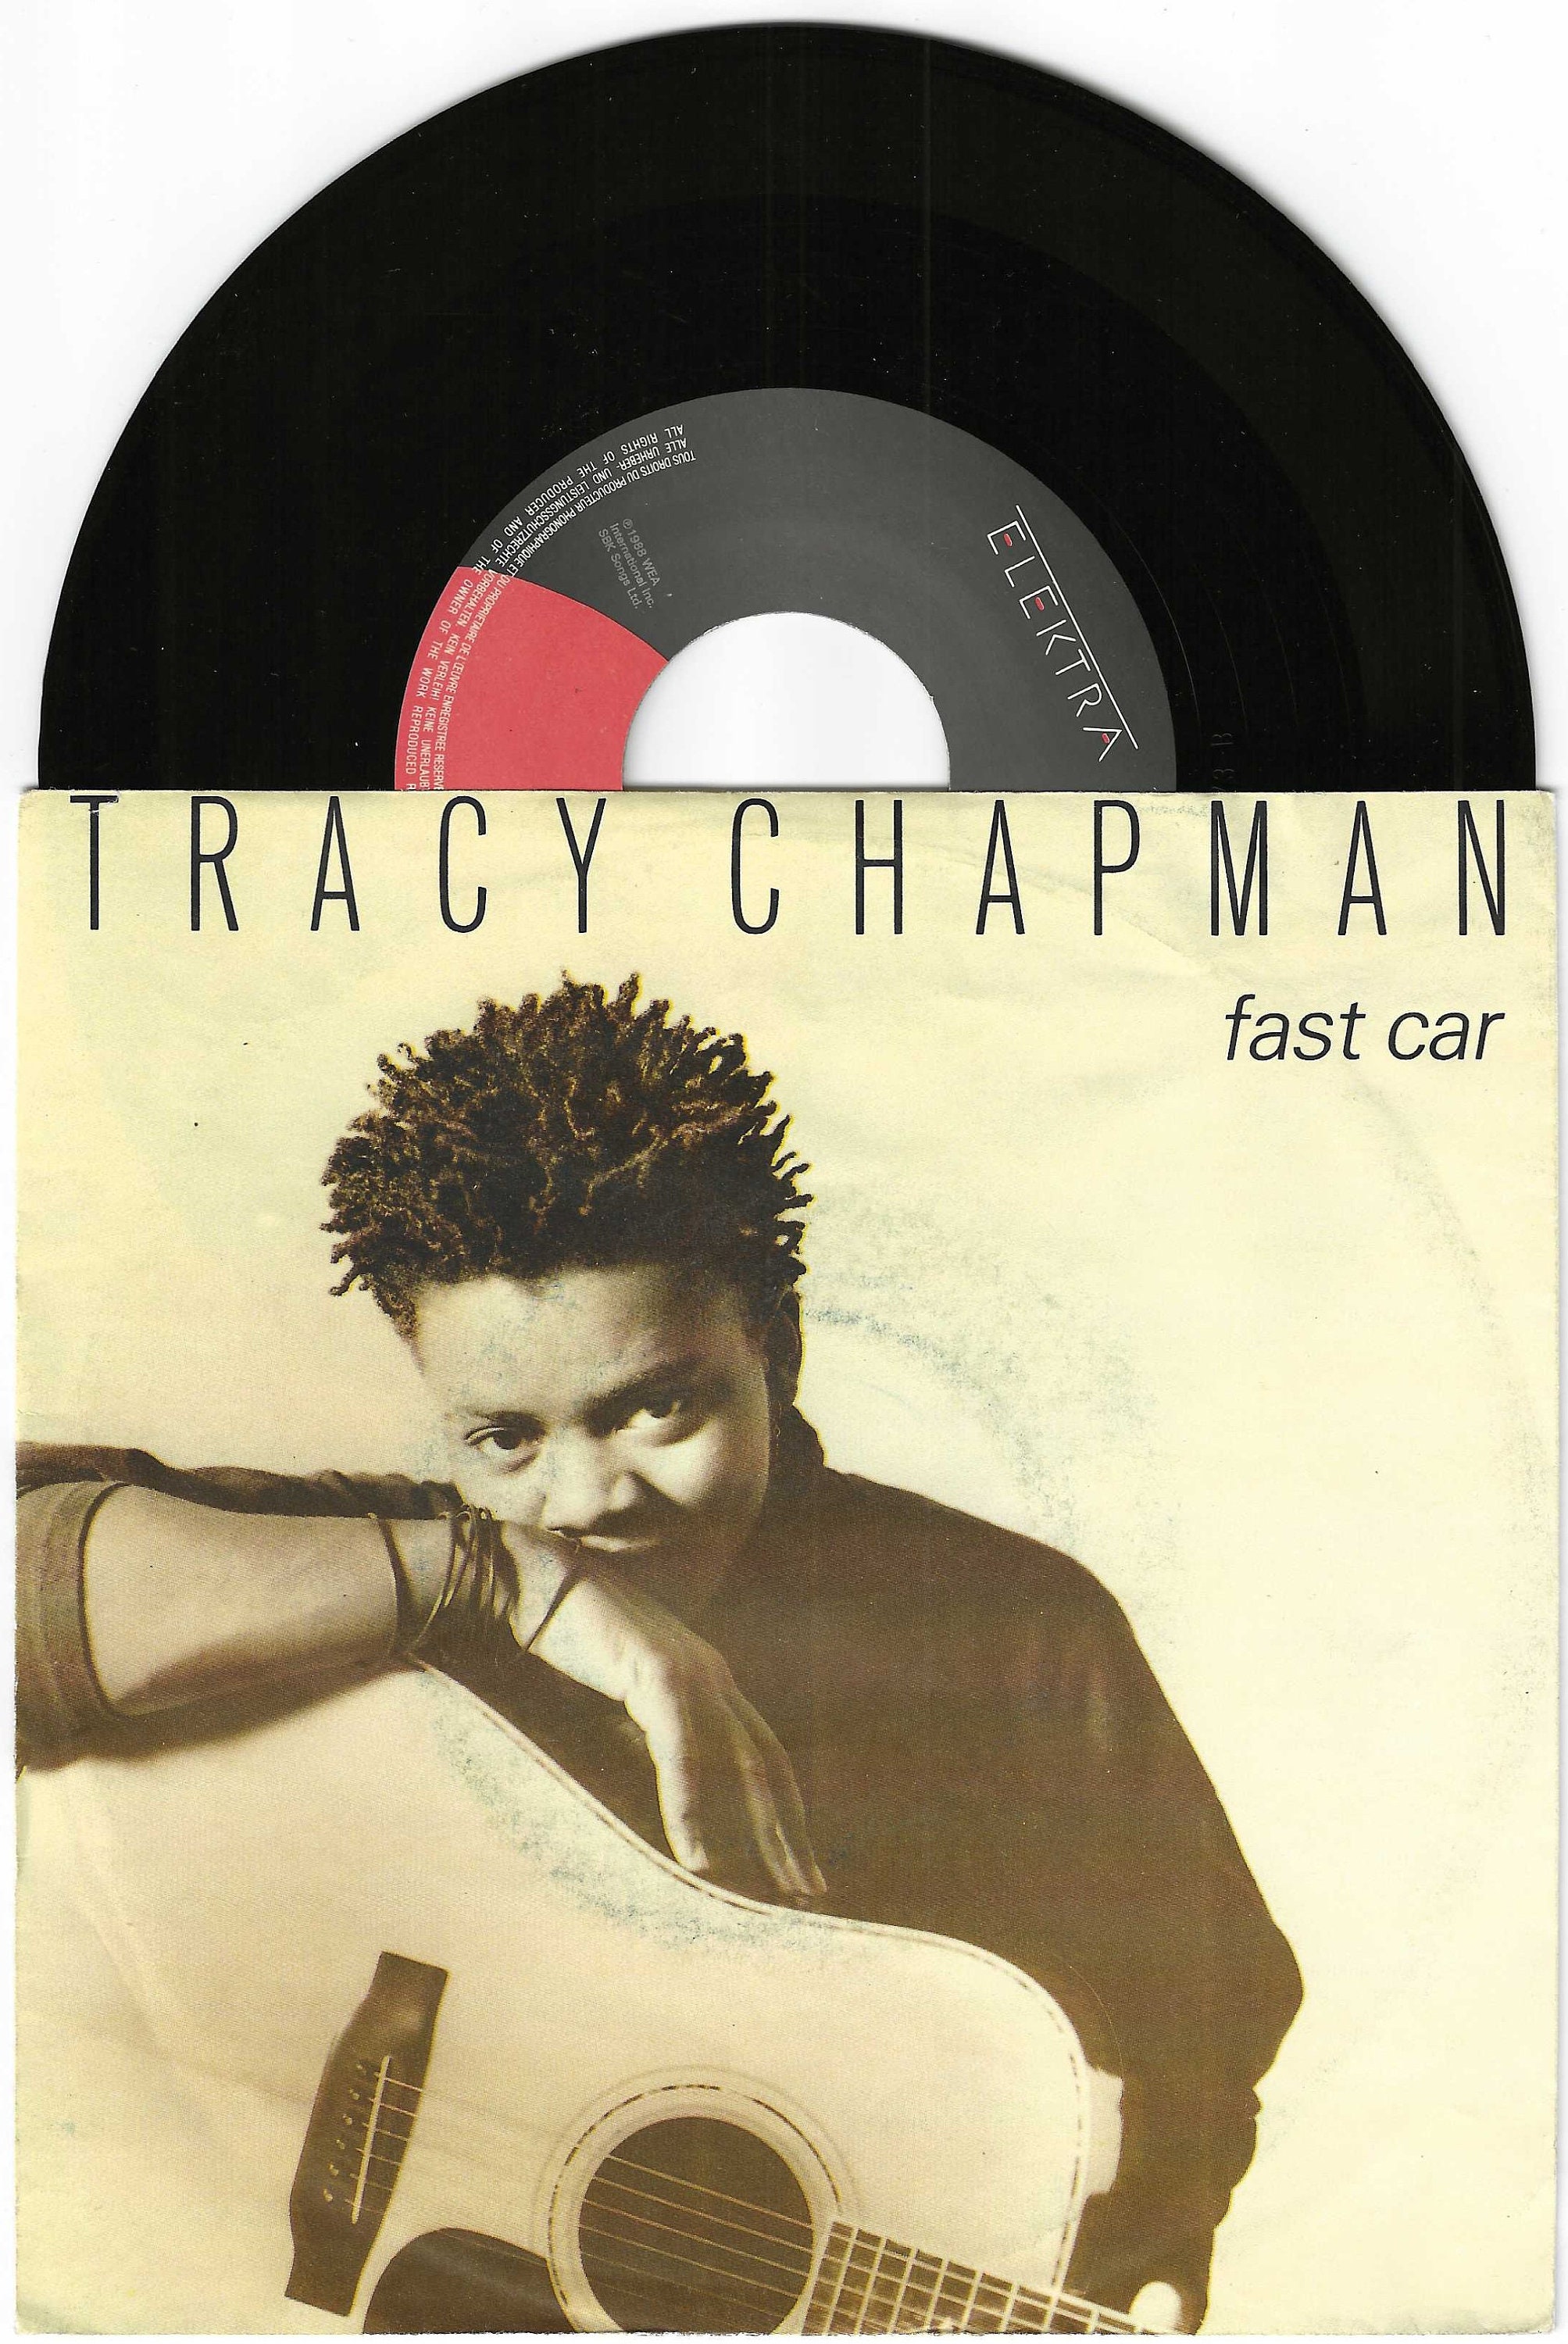 Milepæl Omhyggelig læsning Penneven Tracy Chapman fast Car 7 NM german Import - Etsy